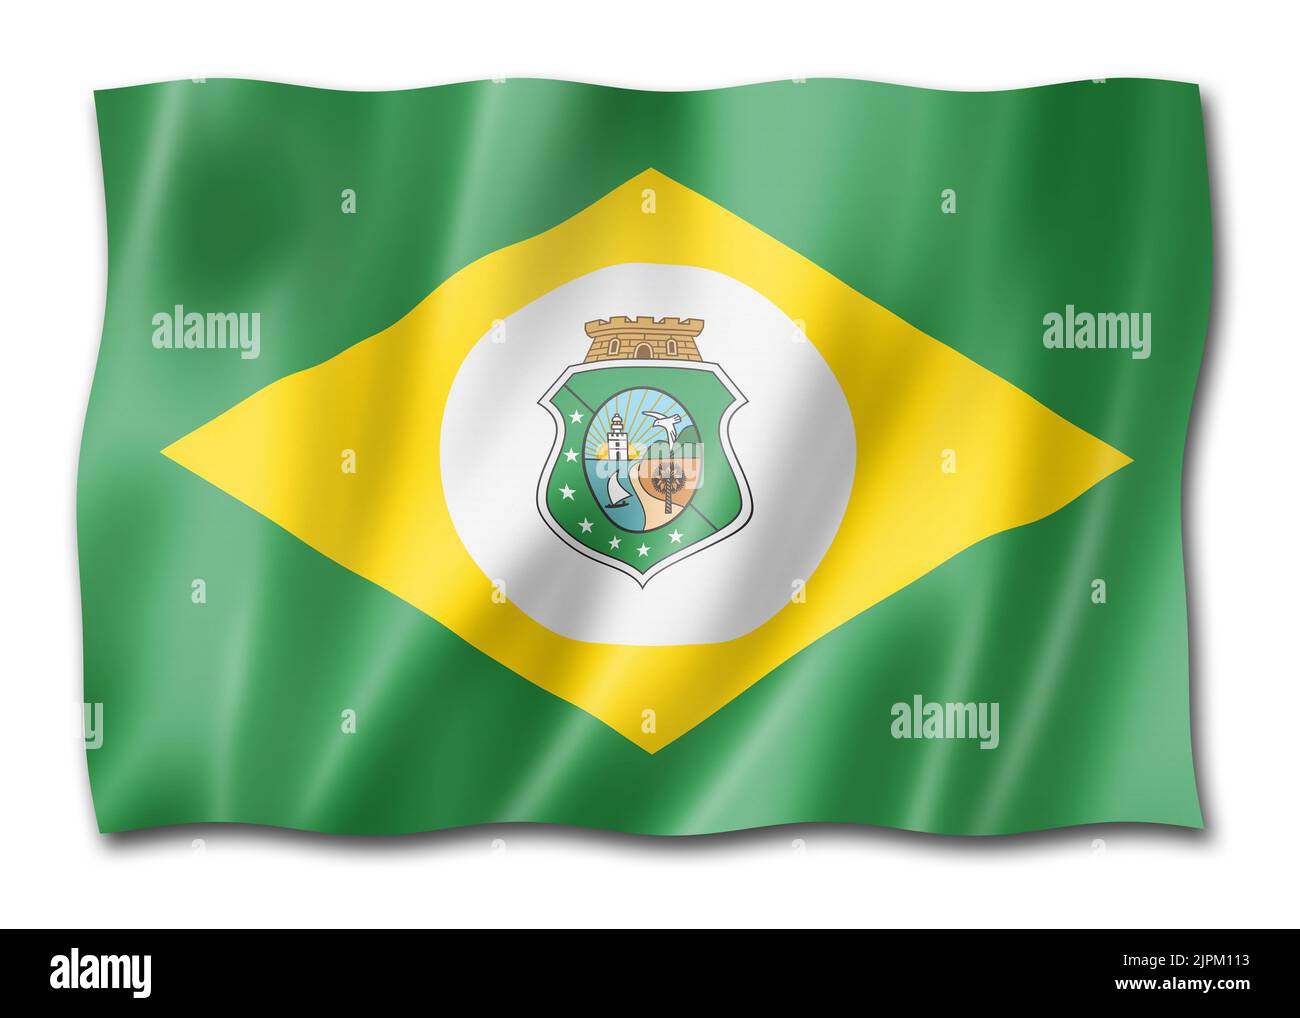 Ceara state flag, Brazil waving banner collection. 3D illustration Stock Photo